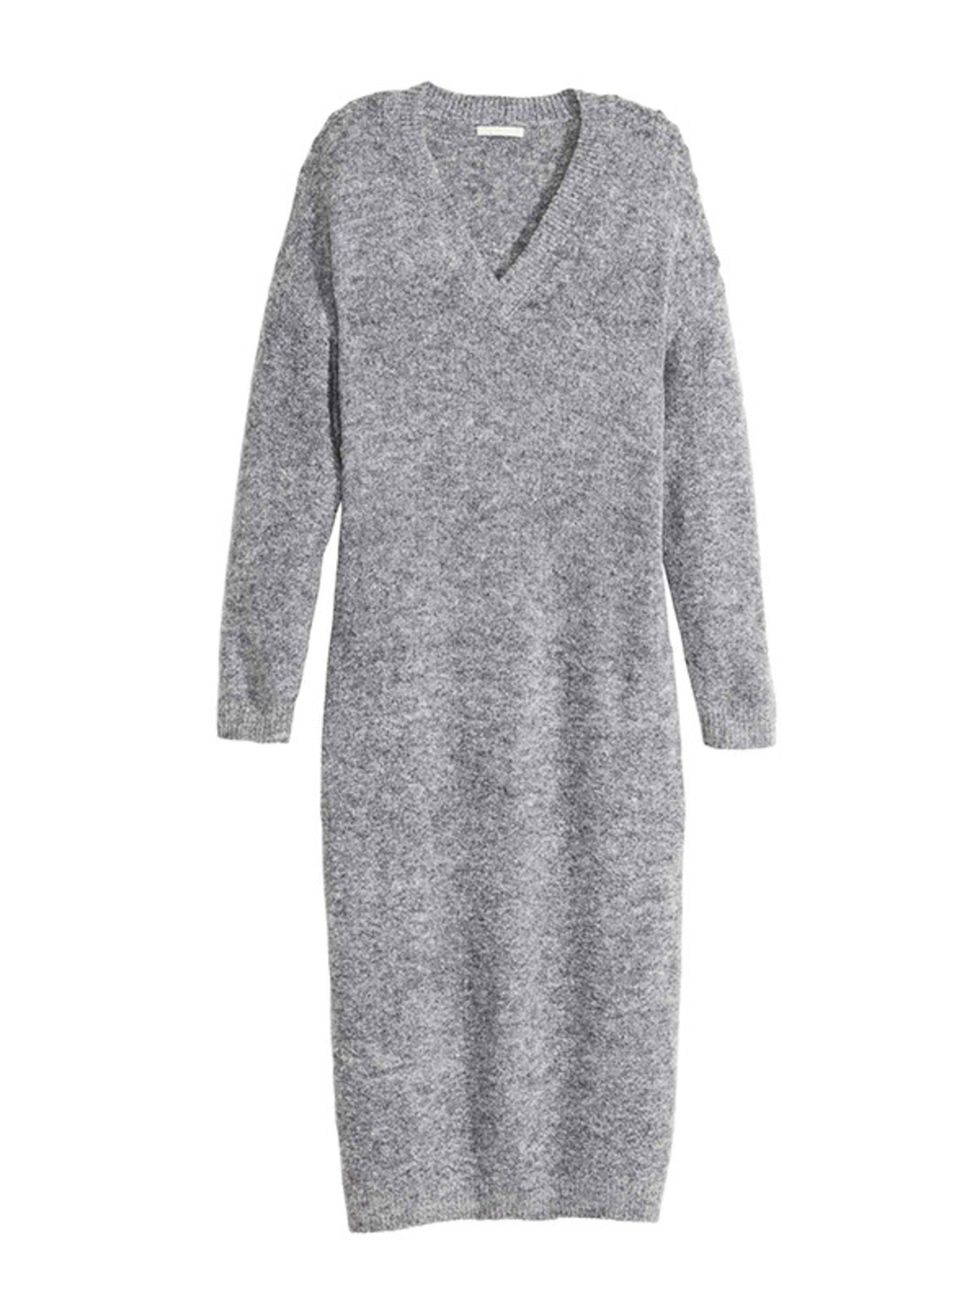 <p><a href="http://www2.hm.com/en_gb/productpage.0364712001.html" target="_blank">H&M</a> knitted dress, £29.99</p>